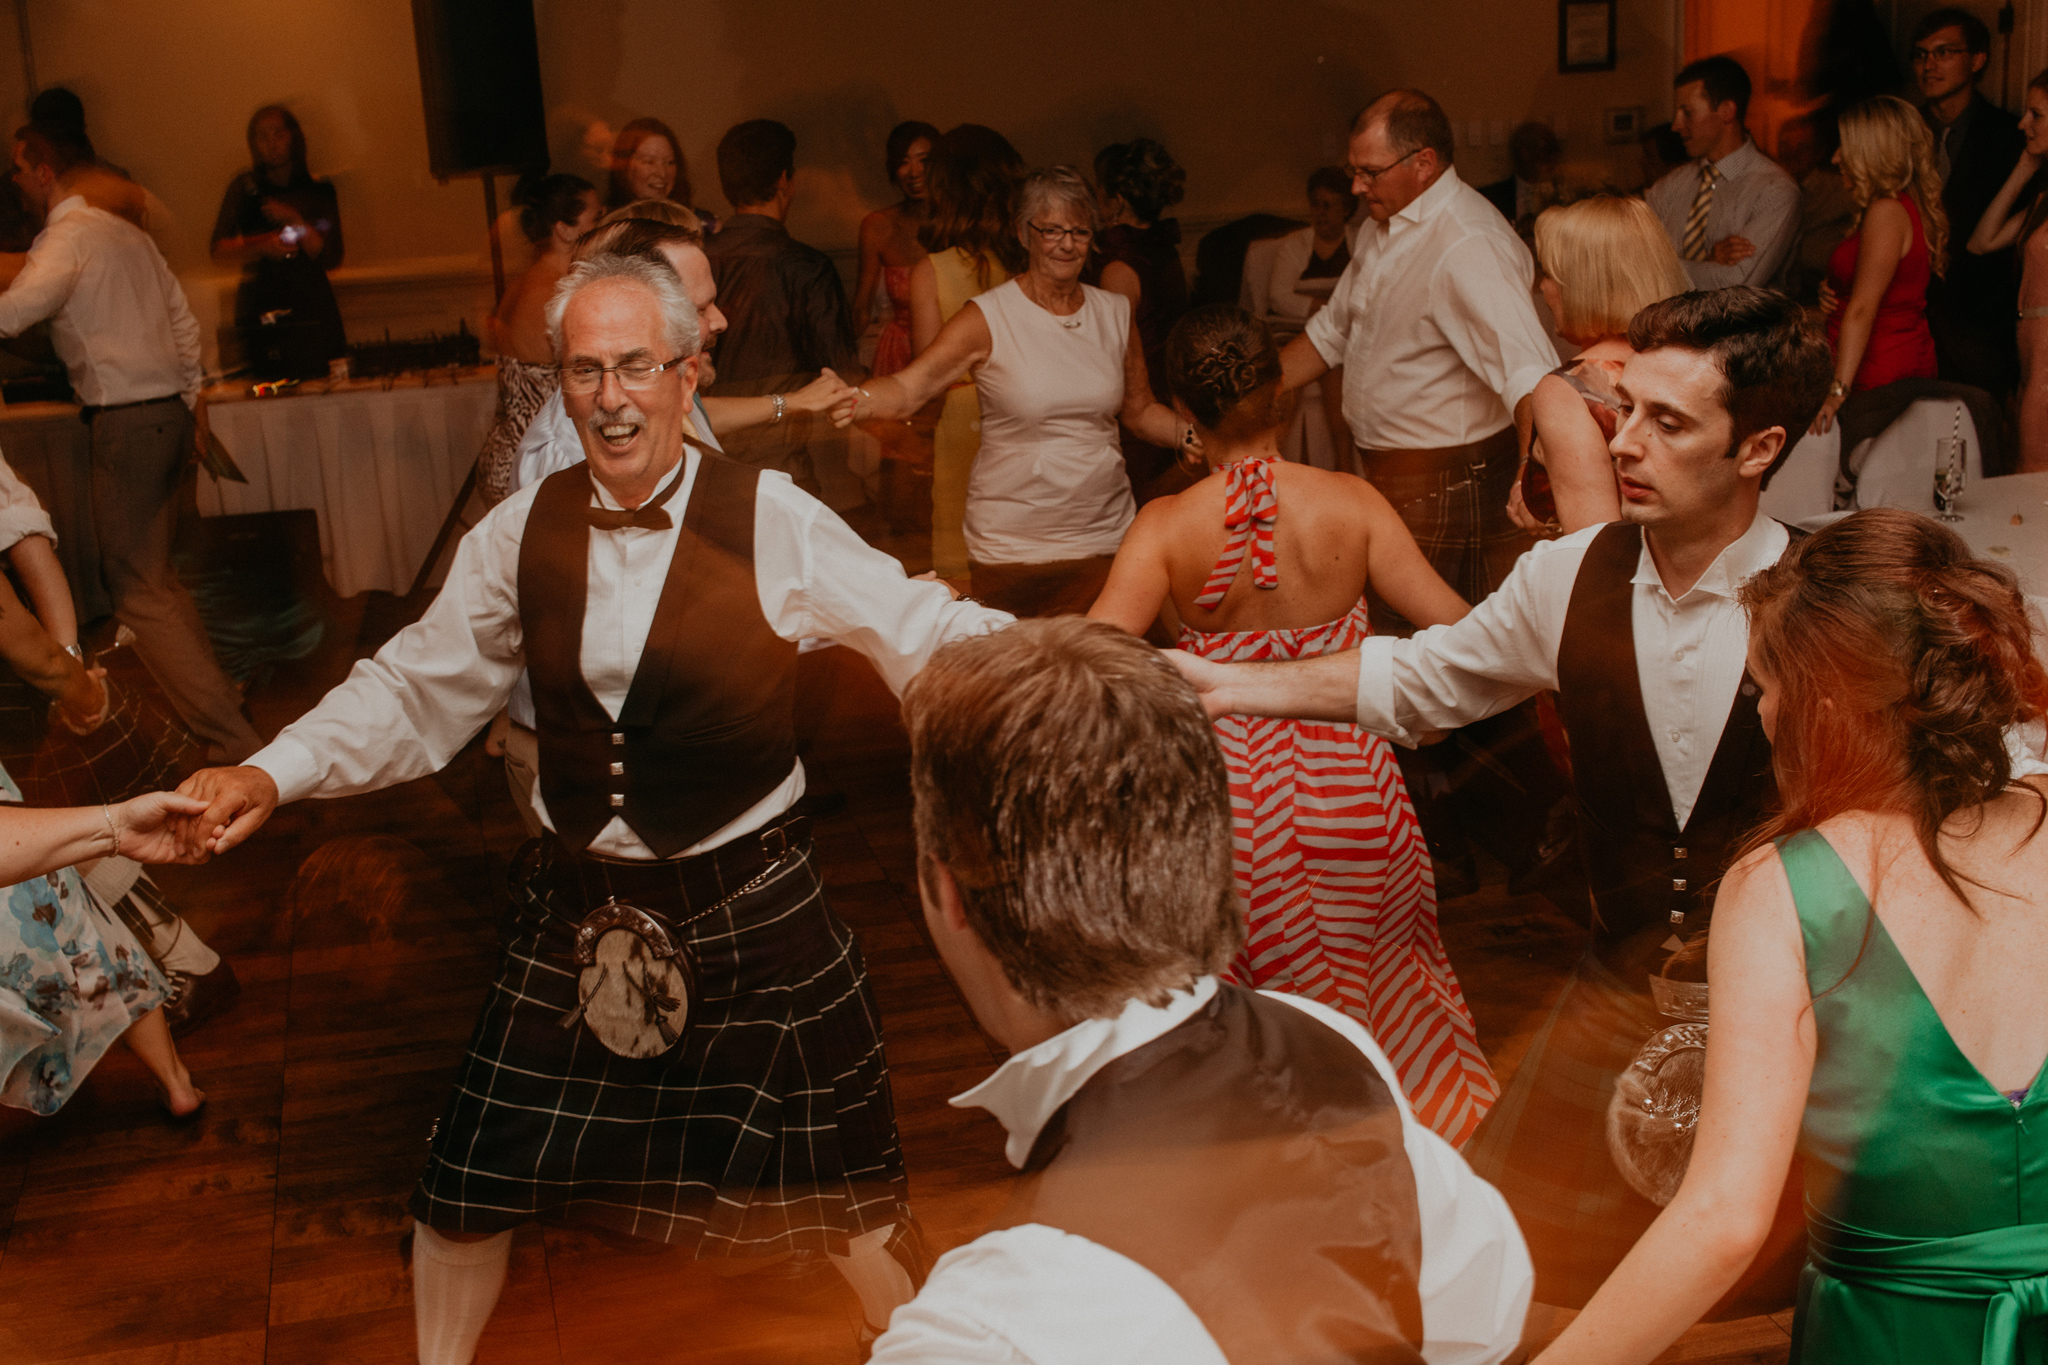 Guests dance in kilts at wedding reception candid documentary wedding photography